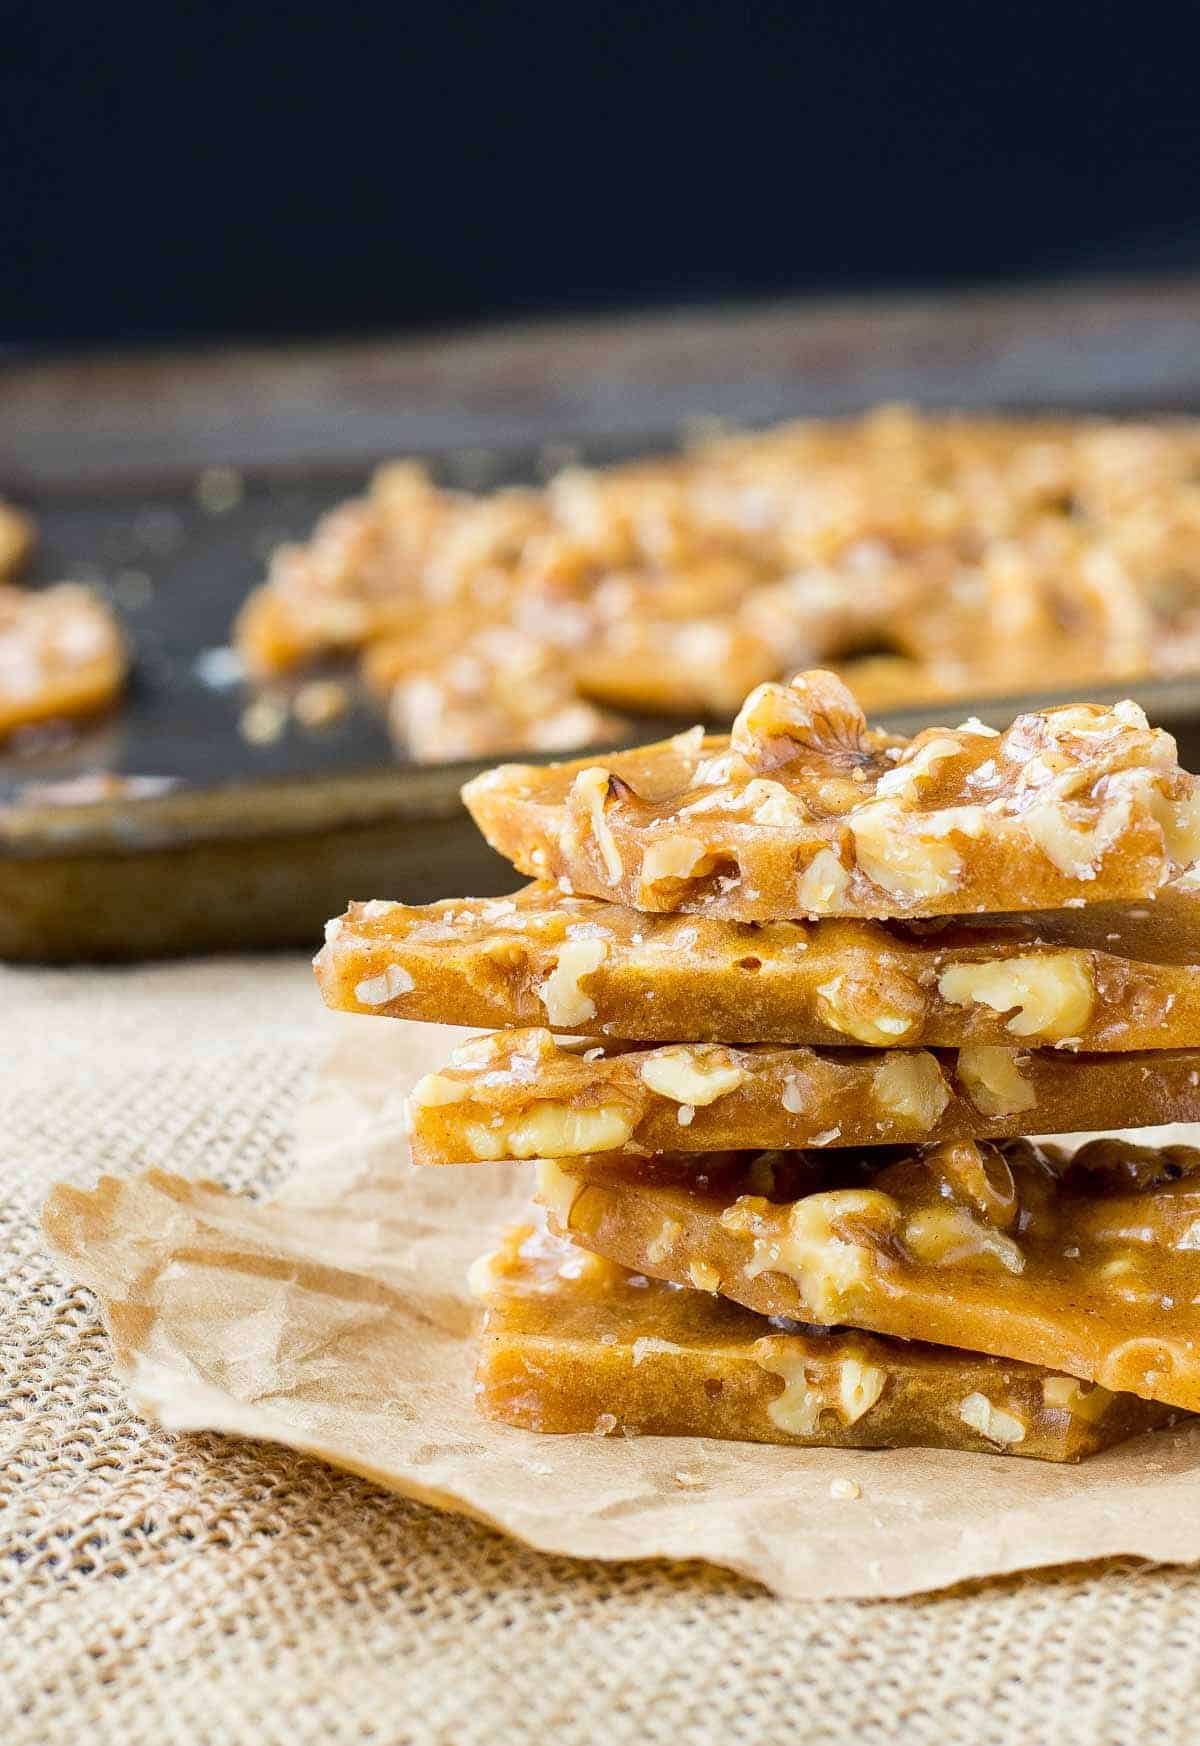 Walnut brittle pieces stacked on top of each other.